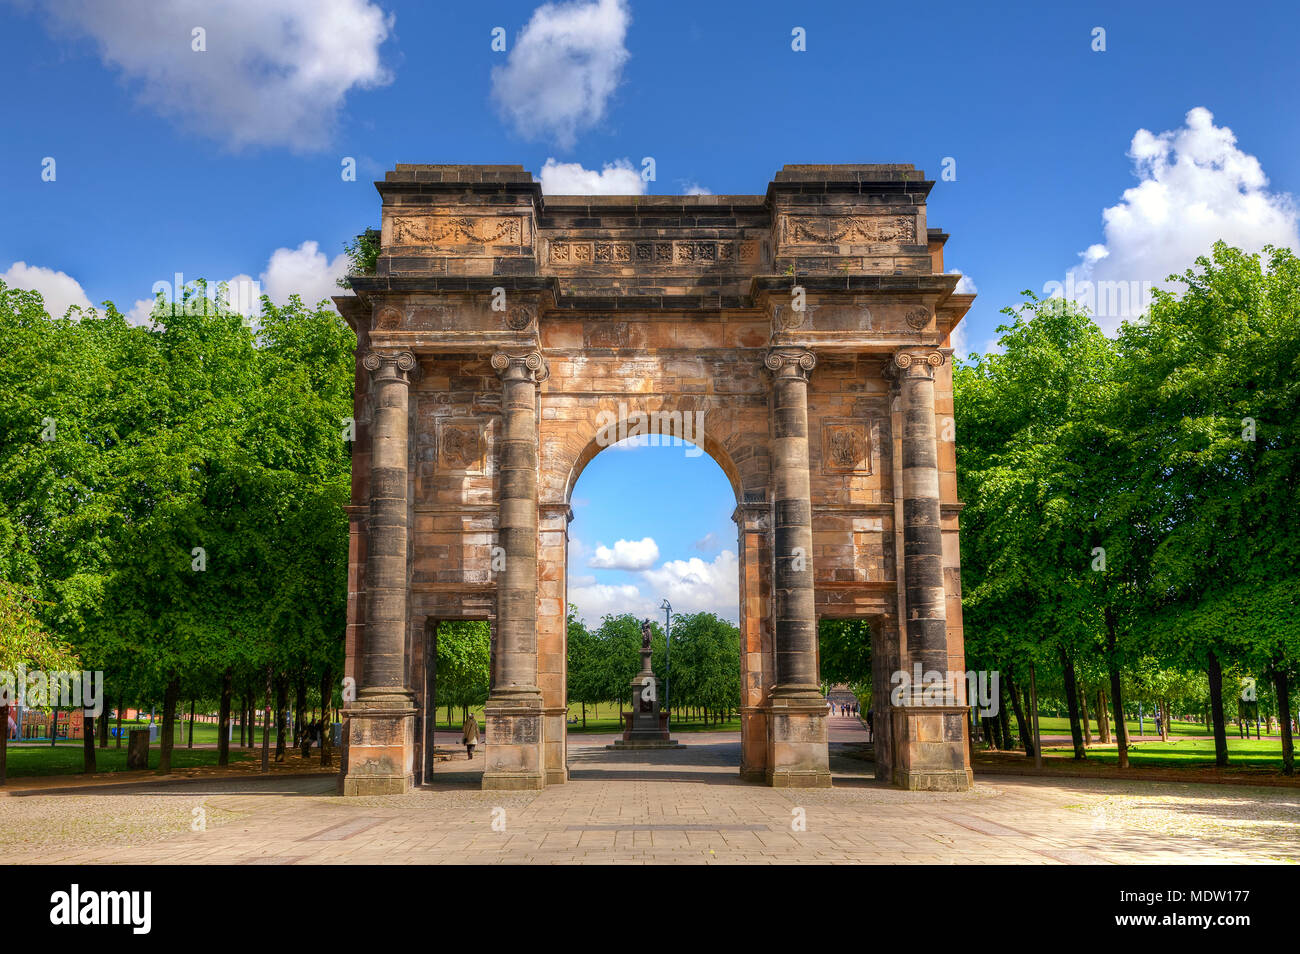 The McLennan Arch at the entrance to Glasgow Green, on a blue sky summer day Stock Photo